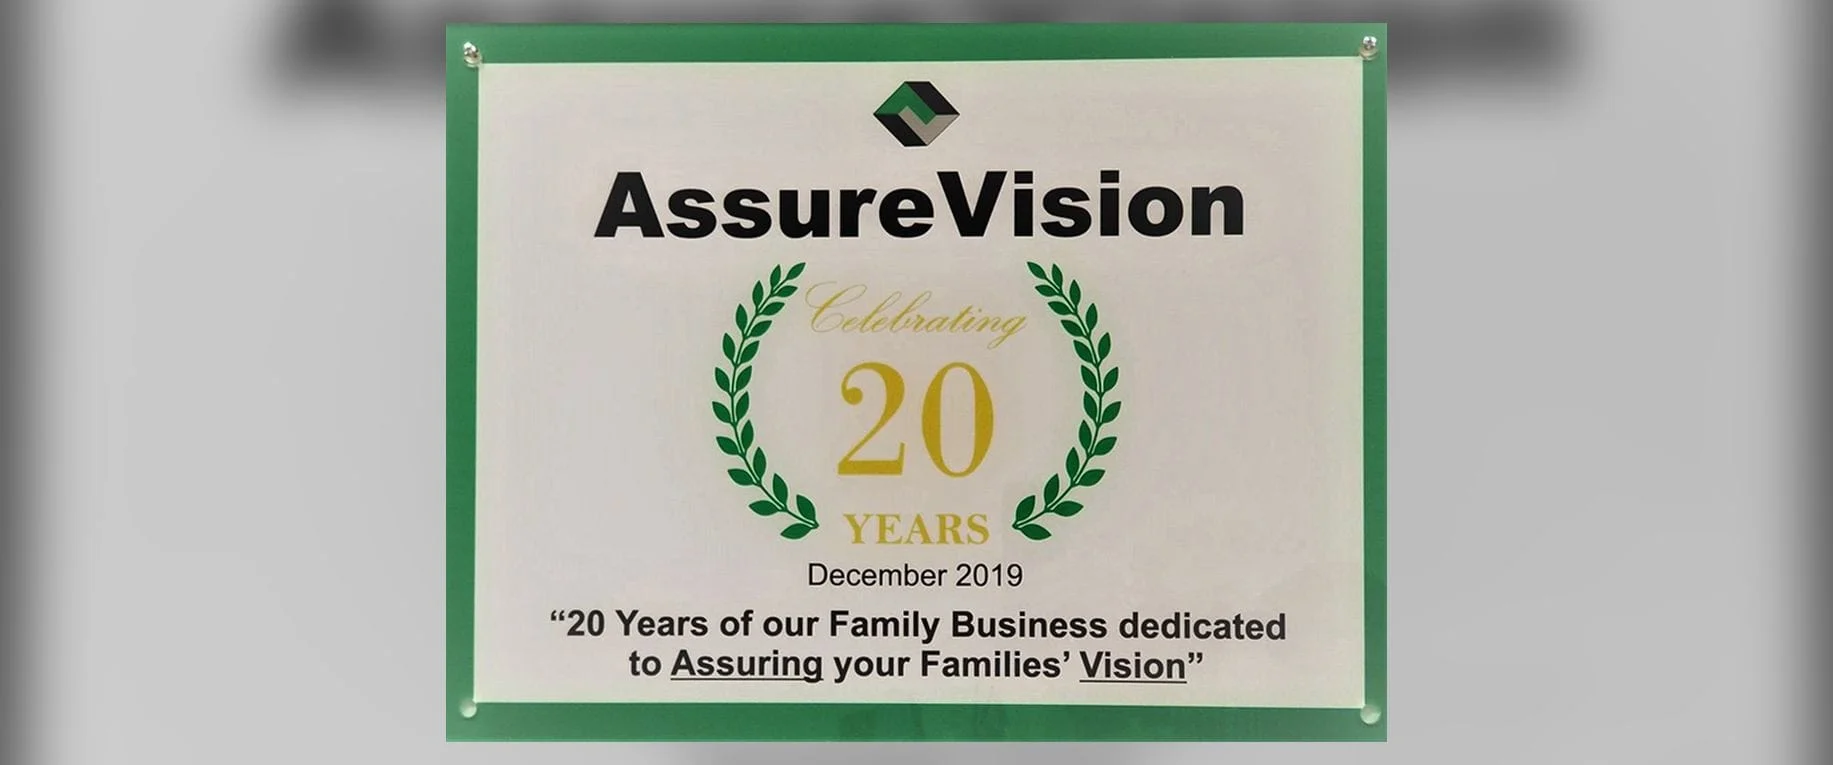 AssureVision 20years